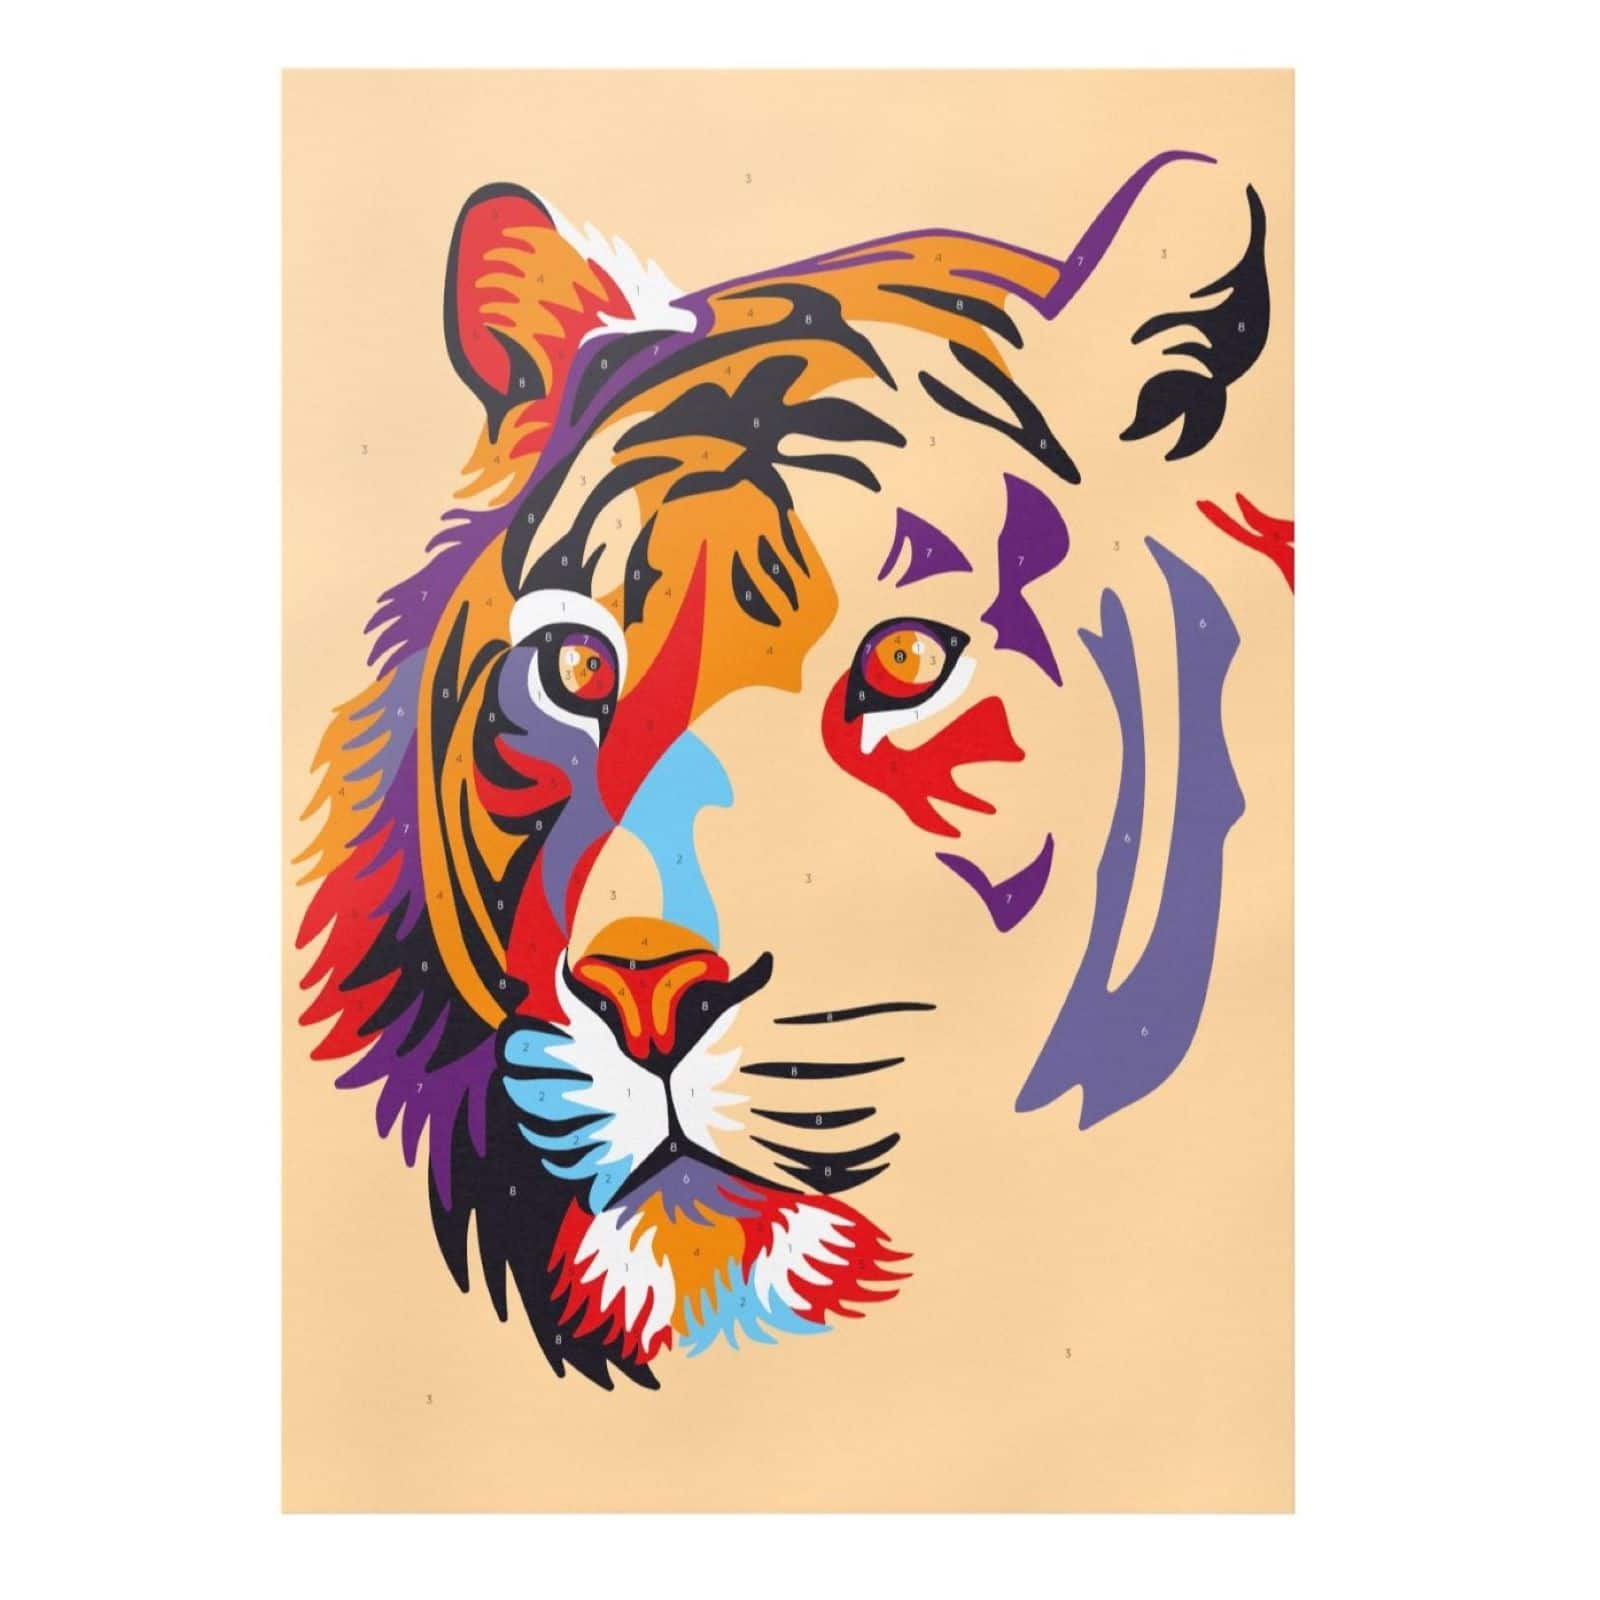 Arteza&#xAE; Tiger Paint by Numbers Kit